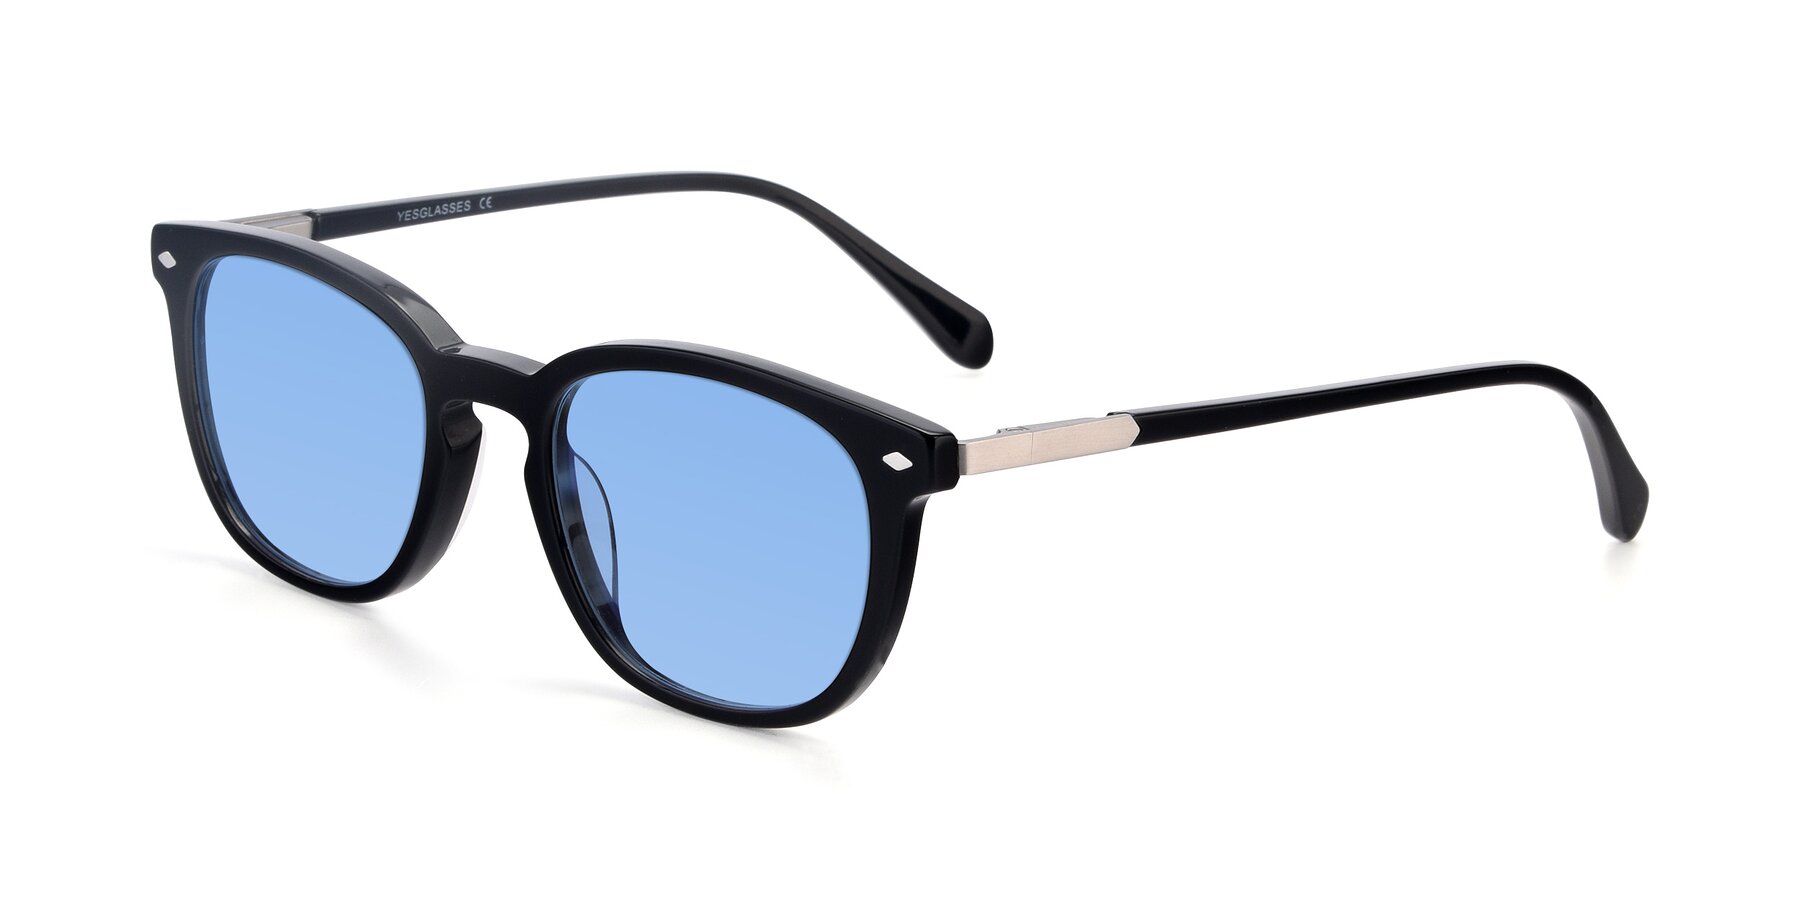 Angle of 17578 in Black with Medium Blue Tinted Lenses